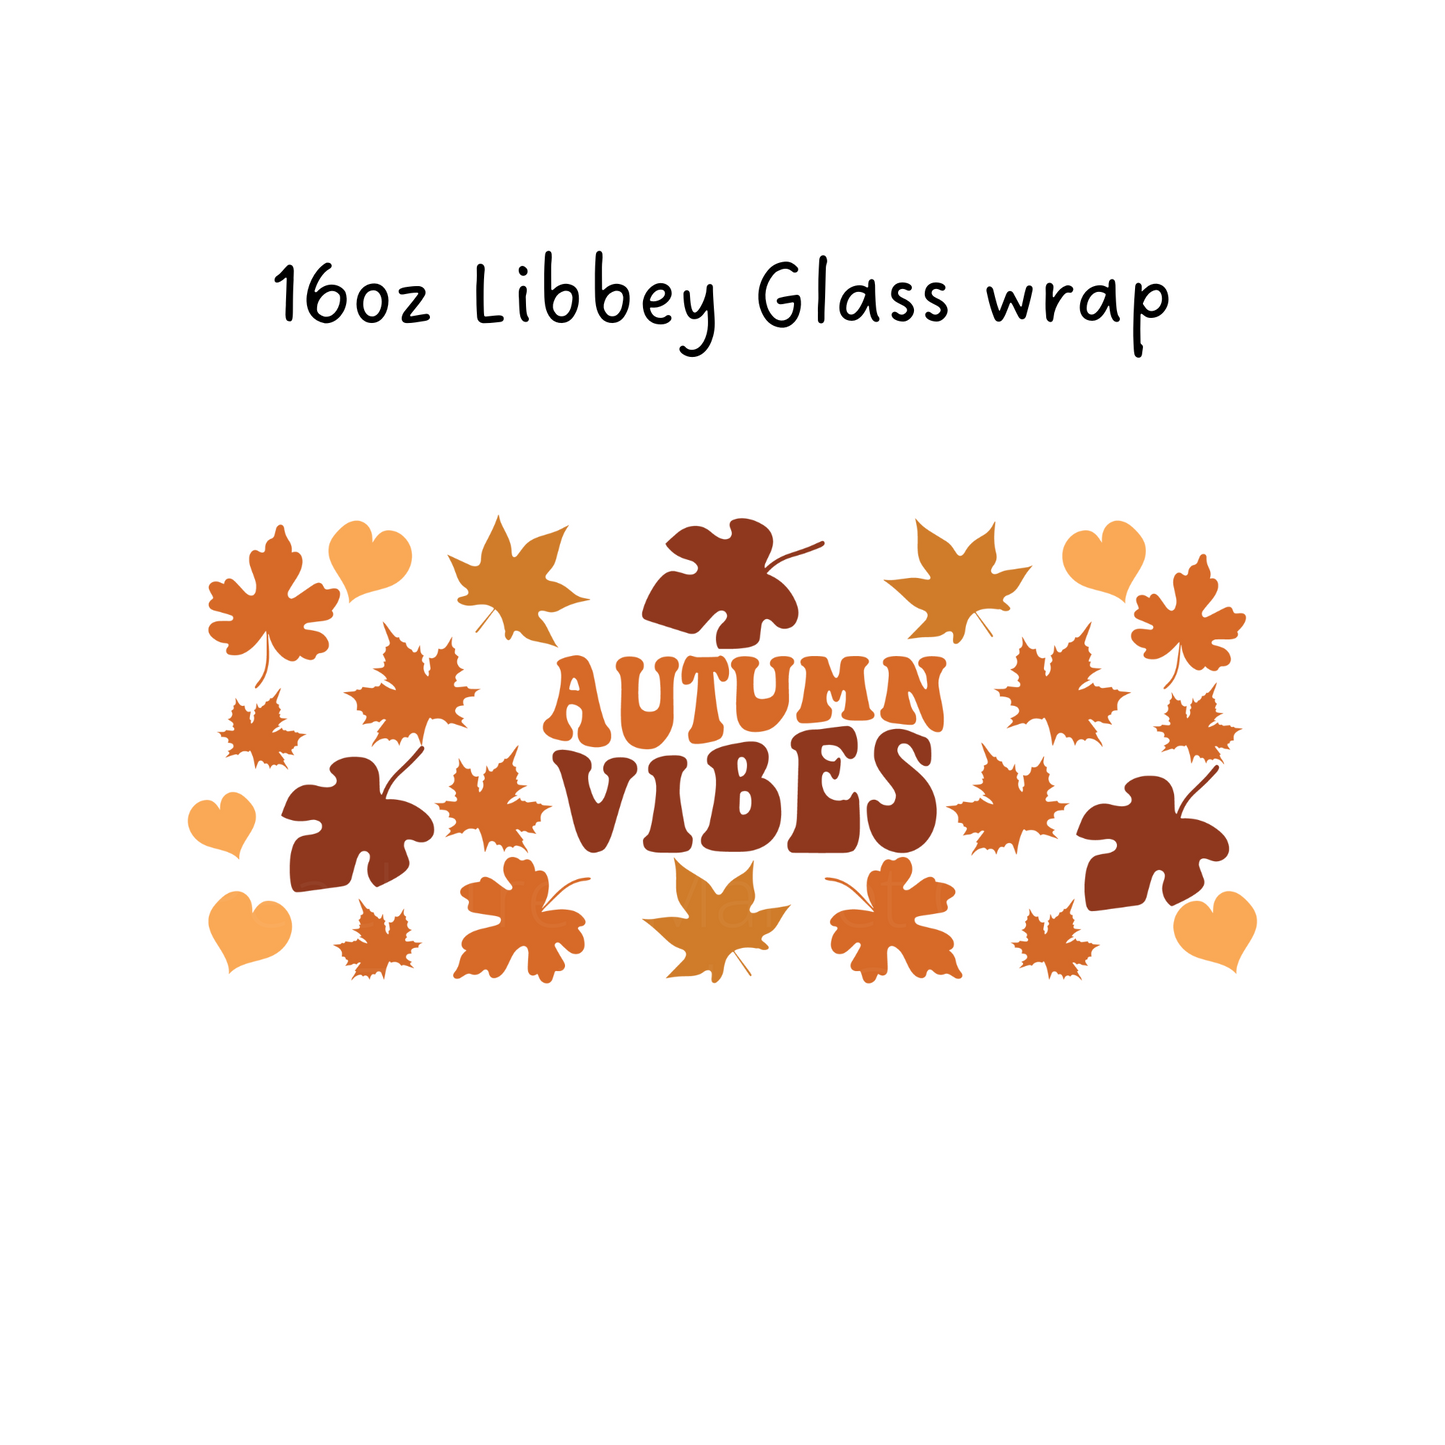 Autumn Vibes 16 Oz Libbey Beer Glass Wrap